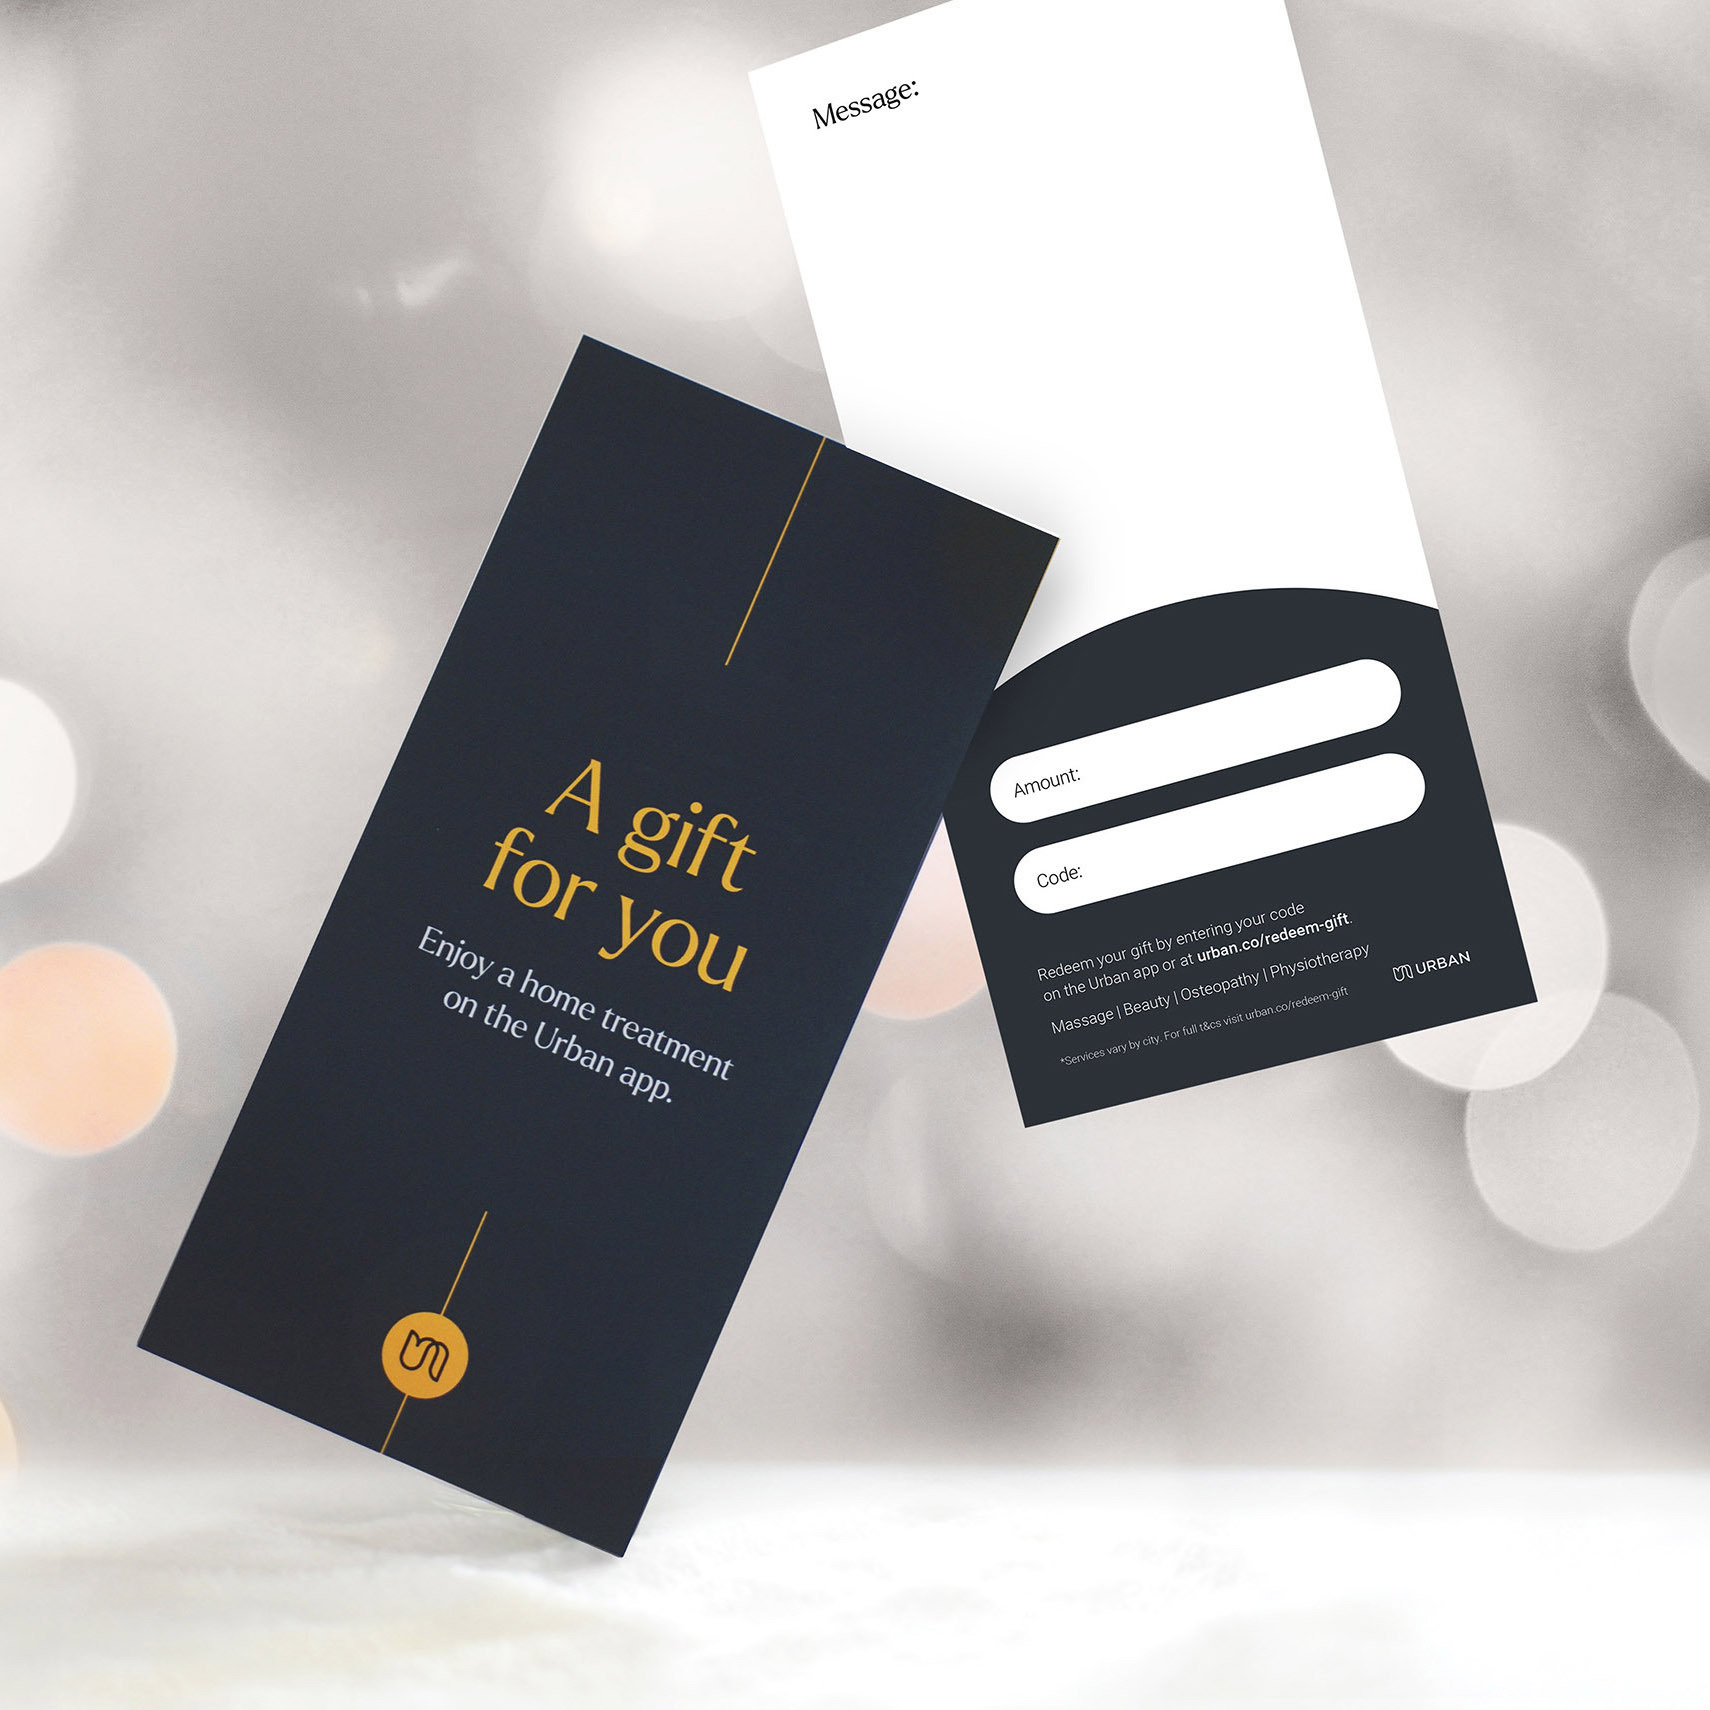 A gift card that reads A gift for you, enjoy a home treatment on the Urban app